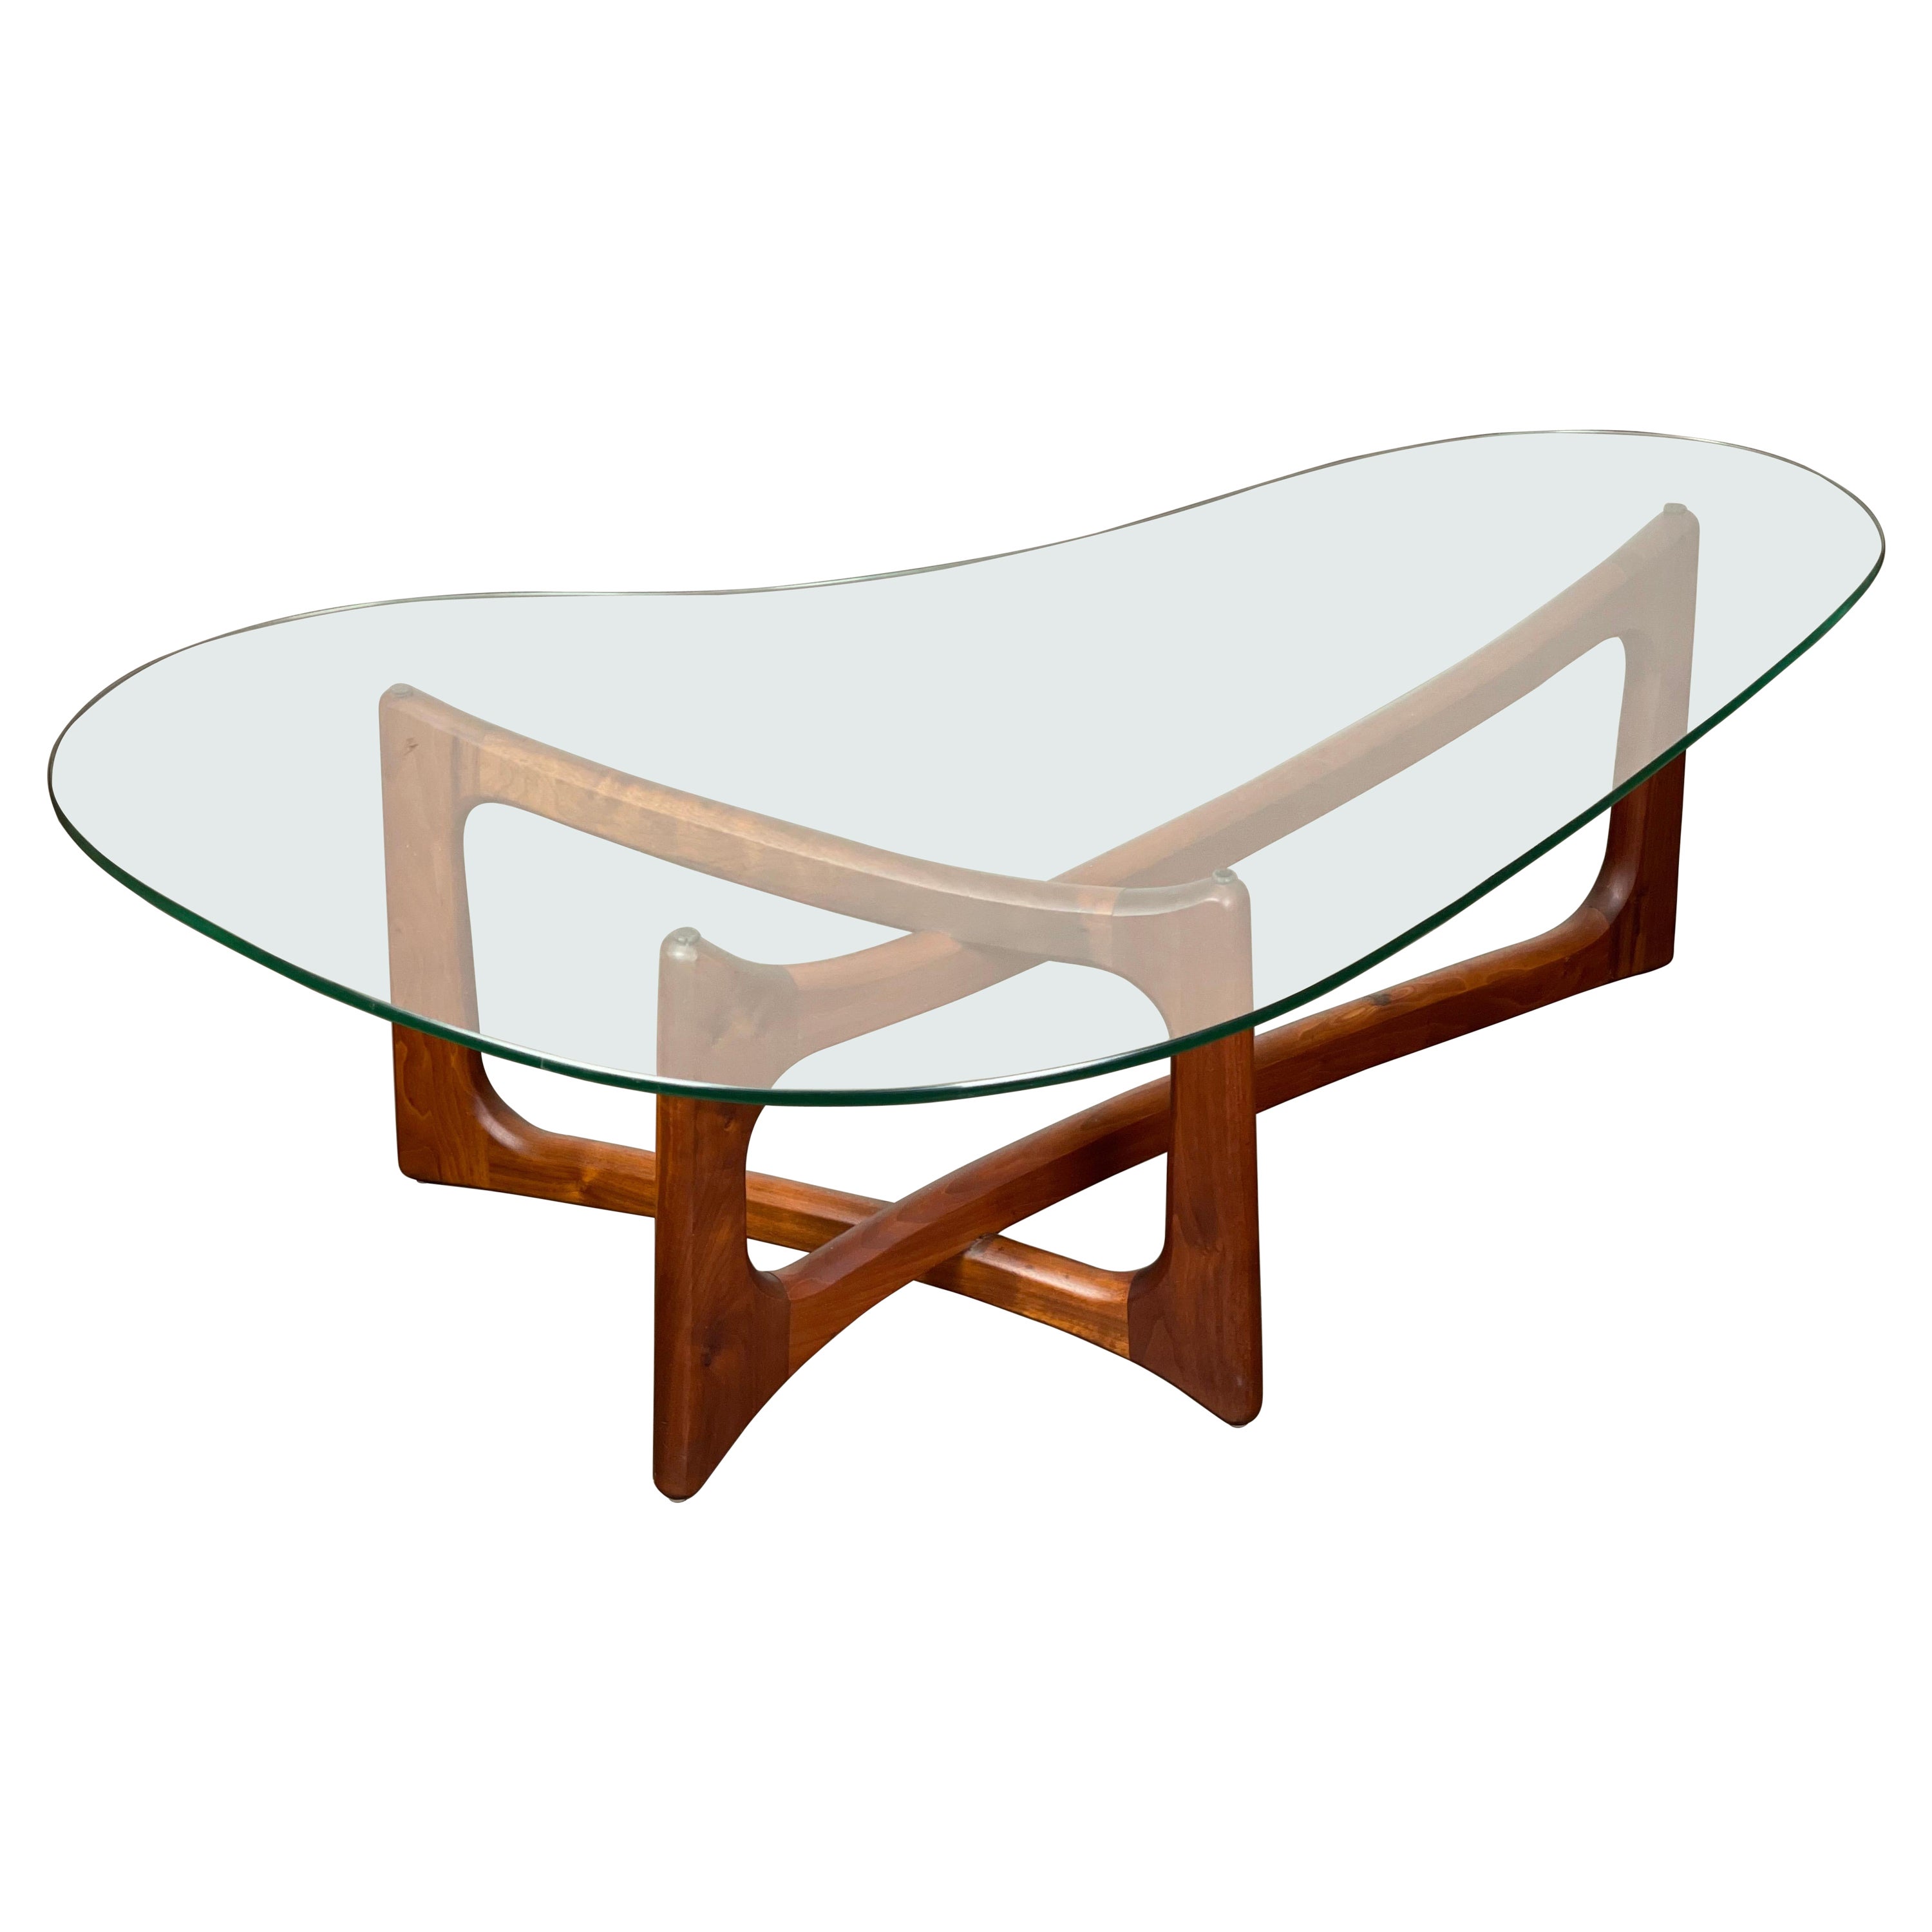 Adrian Pearsall Ribbon Coffee Table in Walnut and Glass for Craft Associates 